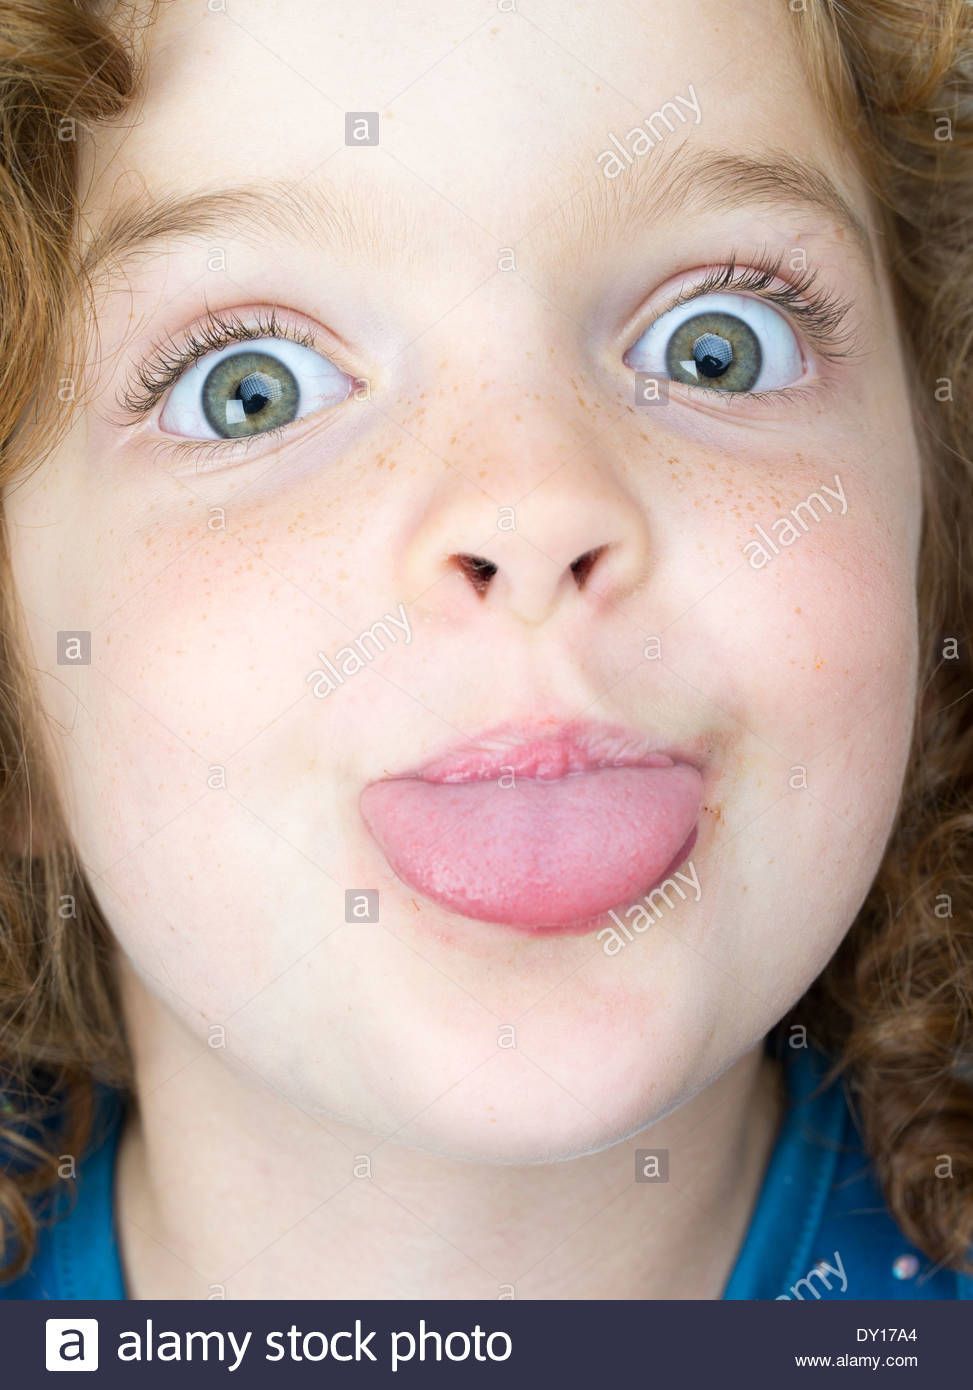 best of Up close Little tongue girl